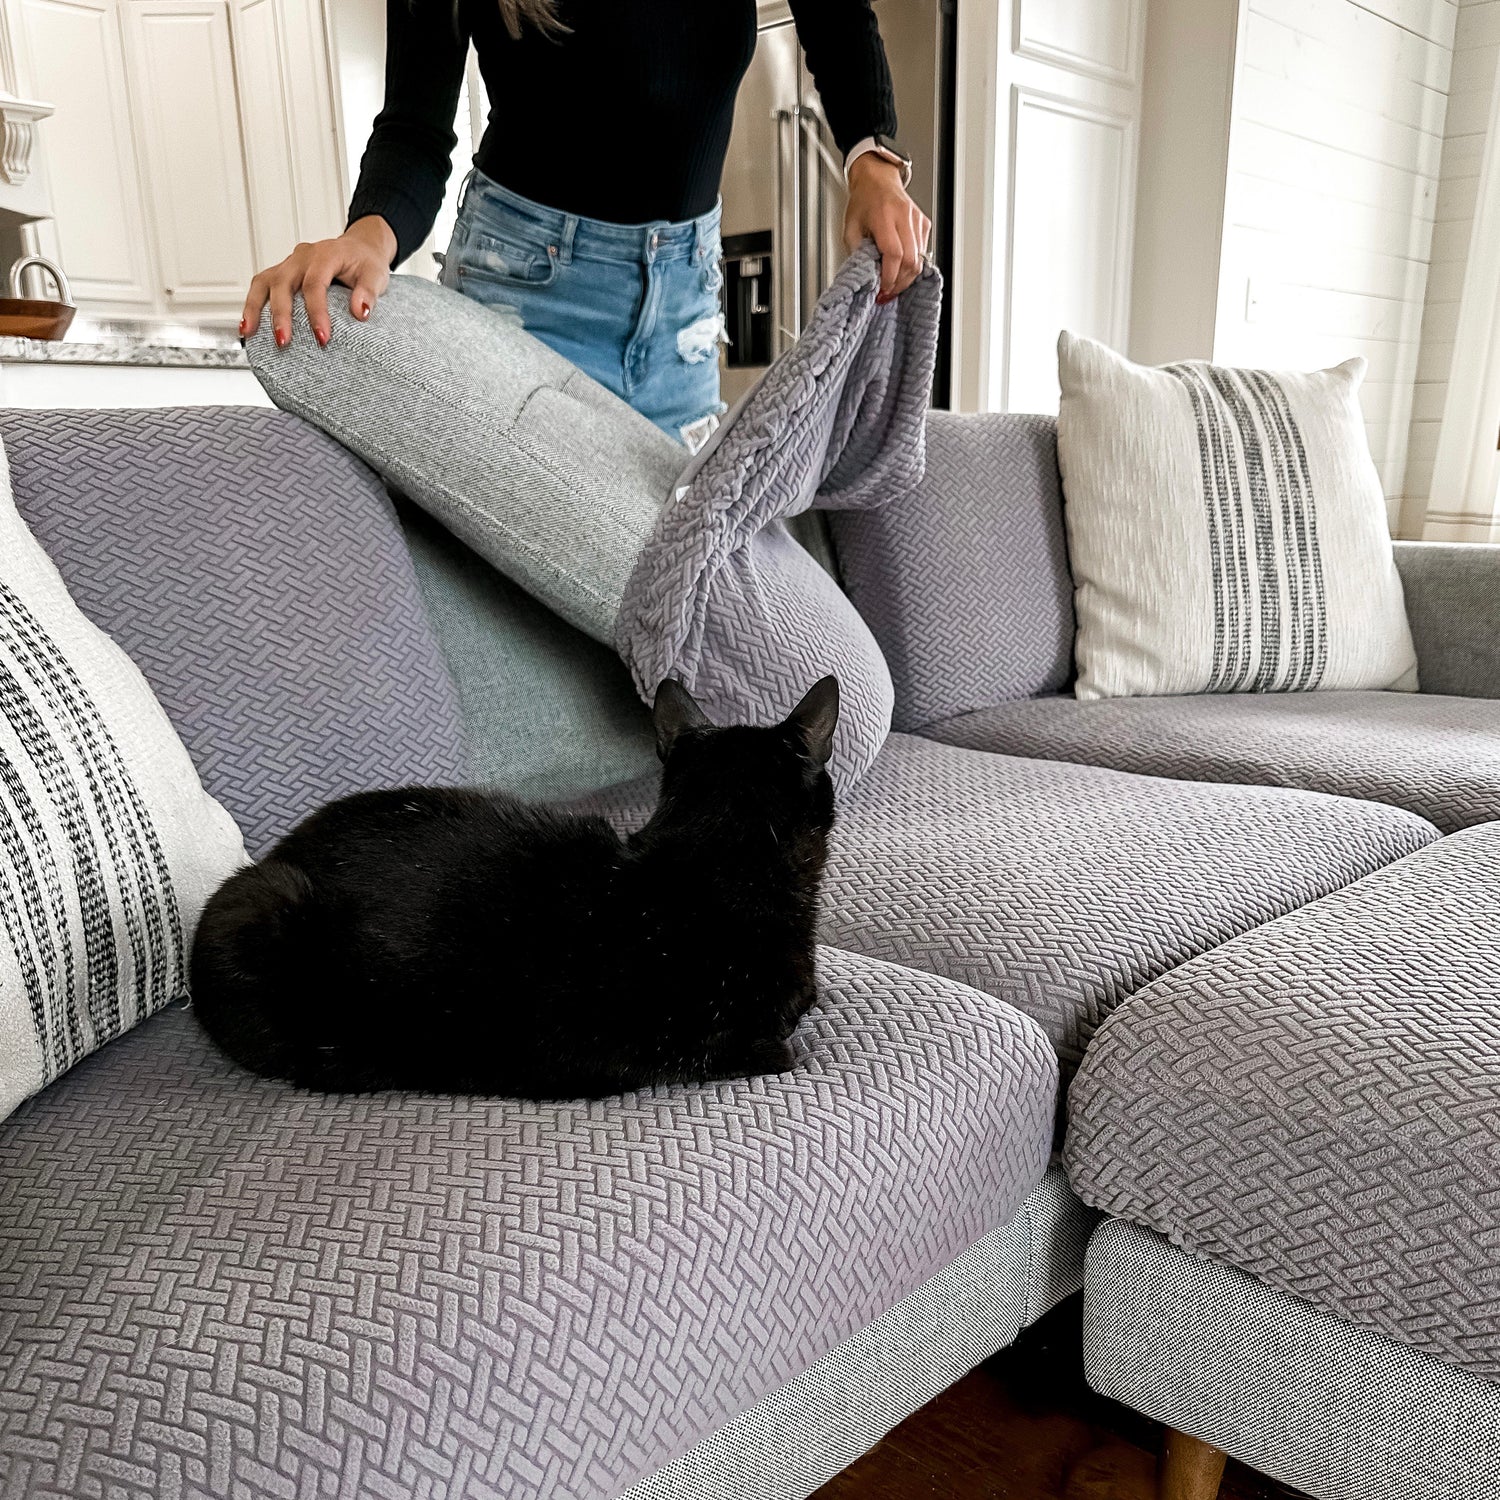 5 Ways to Protect Your Furniture and Decor From Your Pets - Nolan Interior